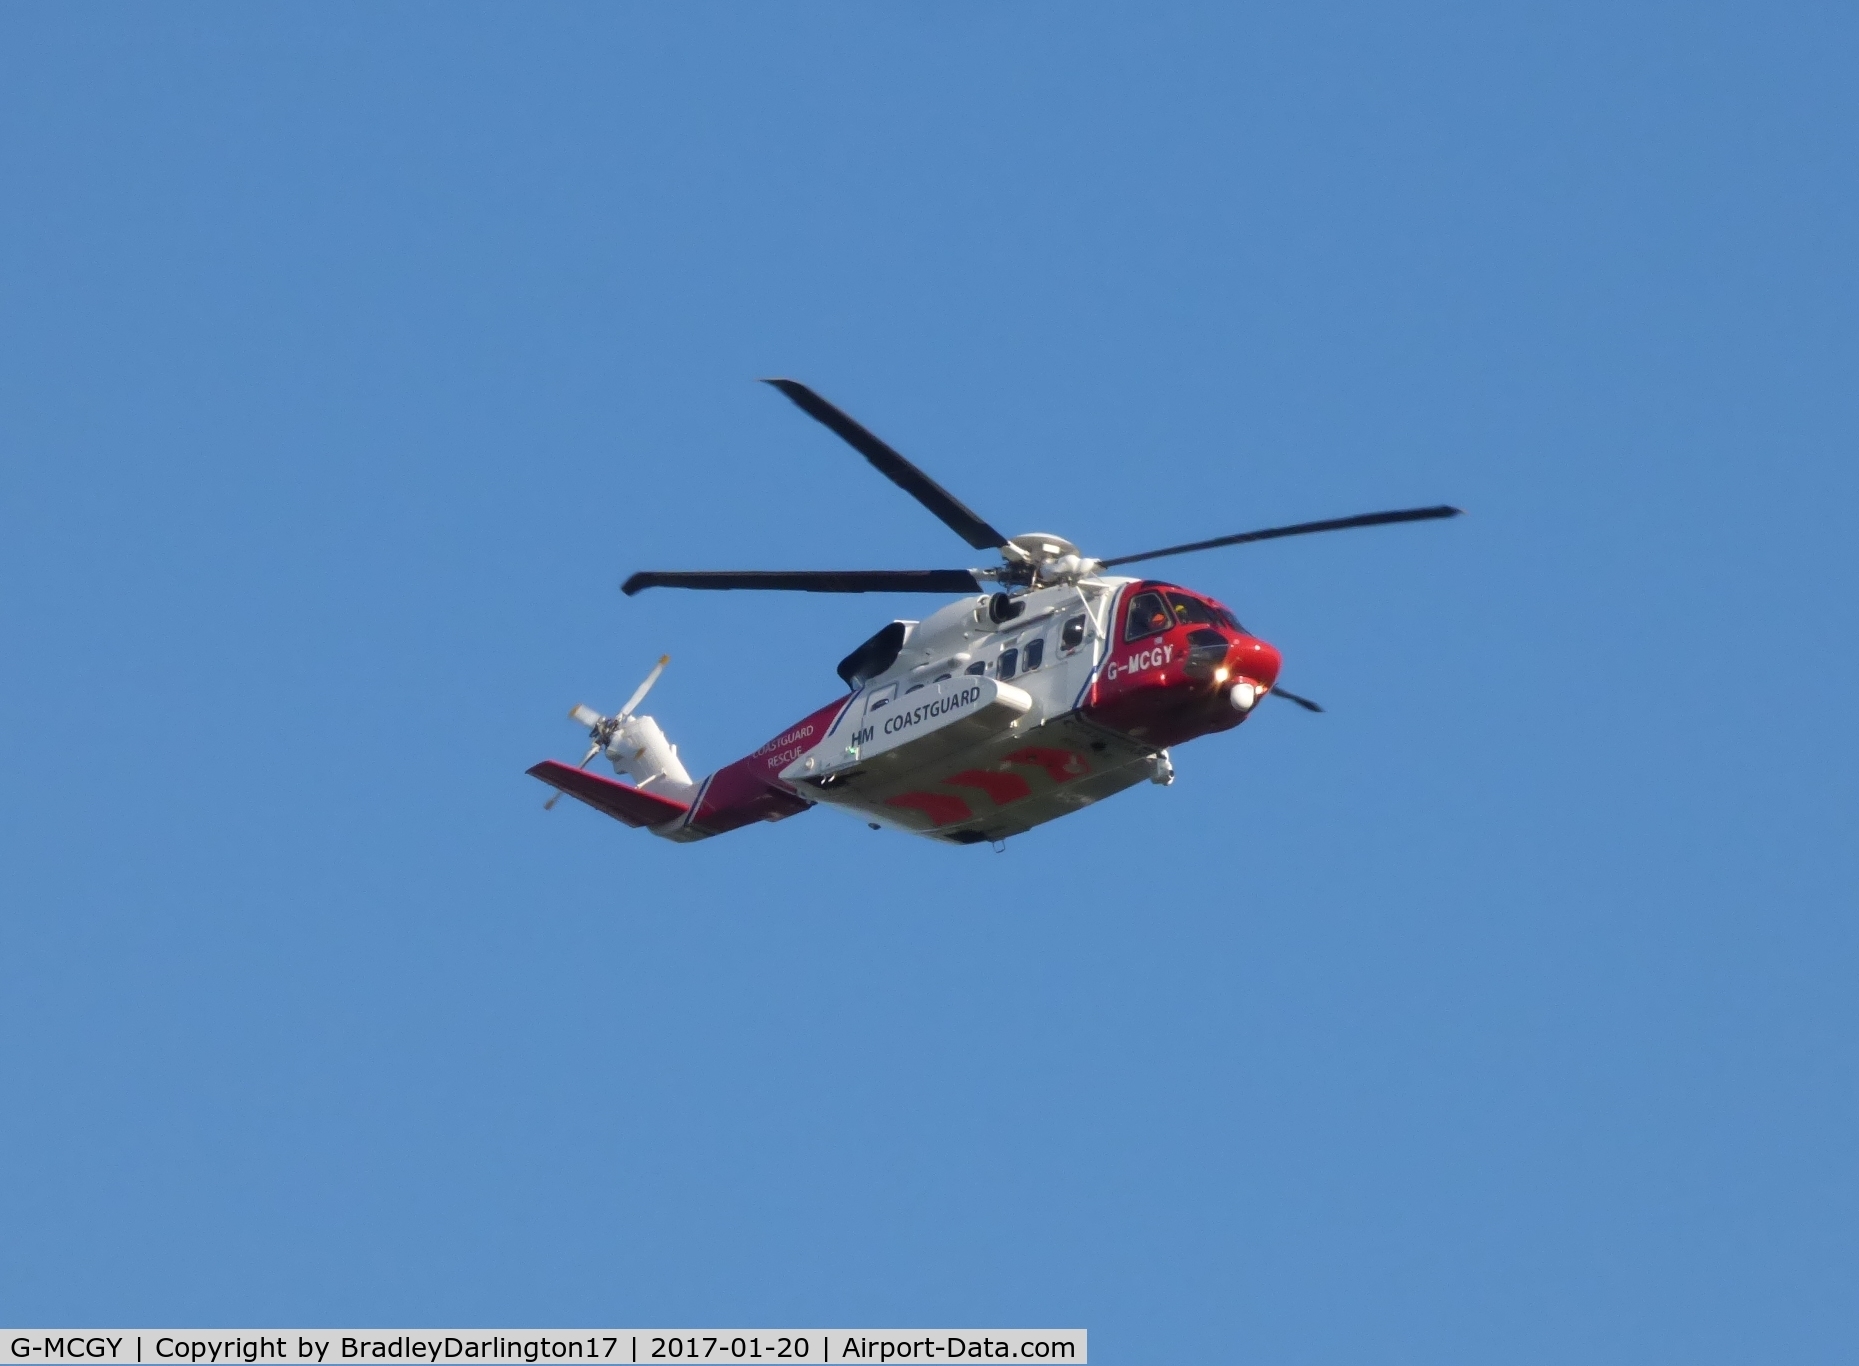 G-MCGY, 2014 Sikorsky S-92A C/N 920257, Coastguard Helicopter on route to derriford hospital